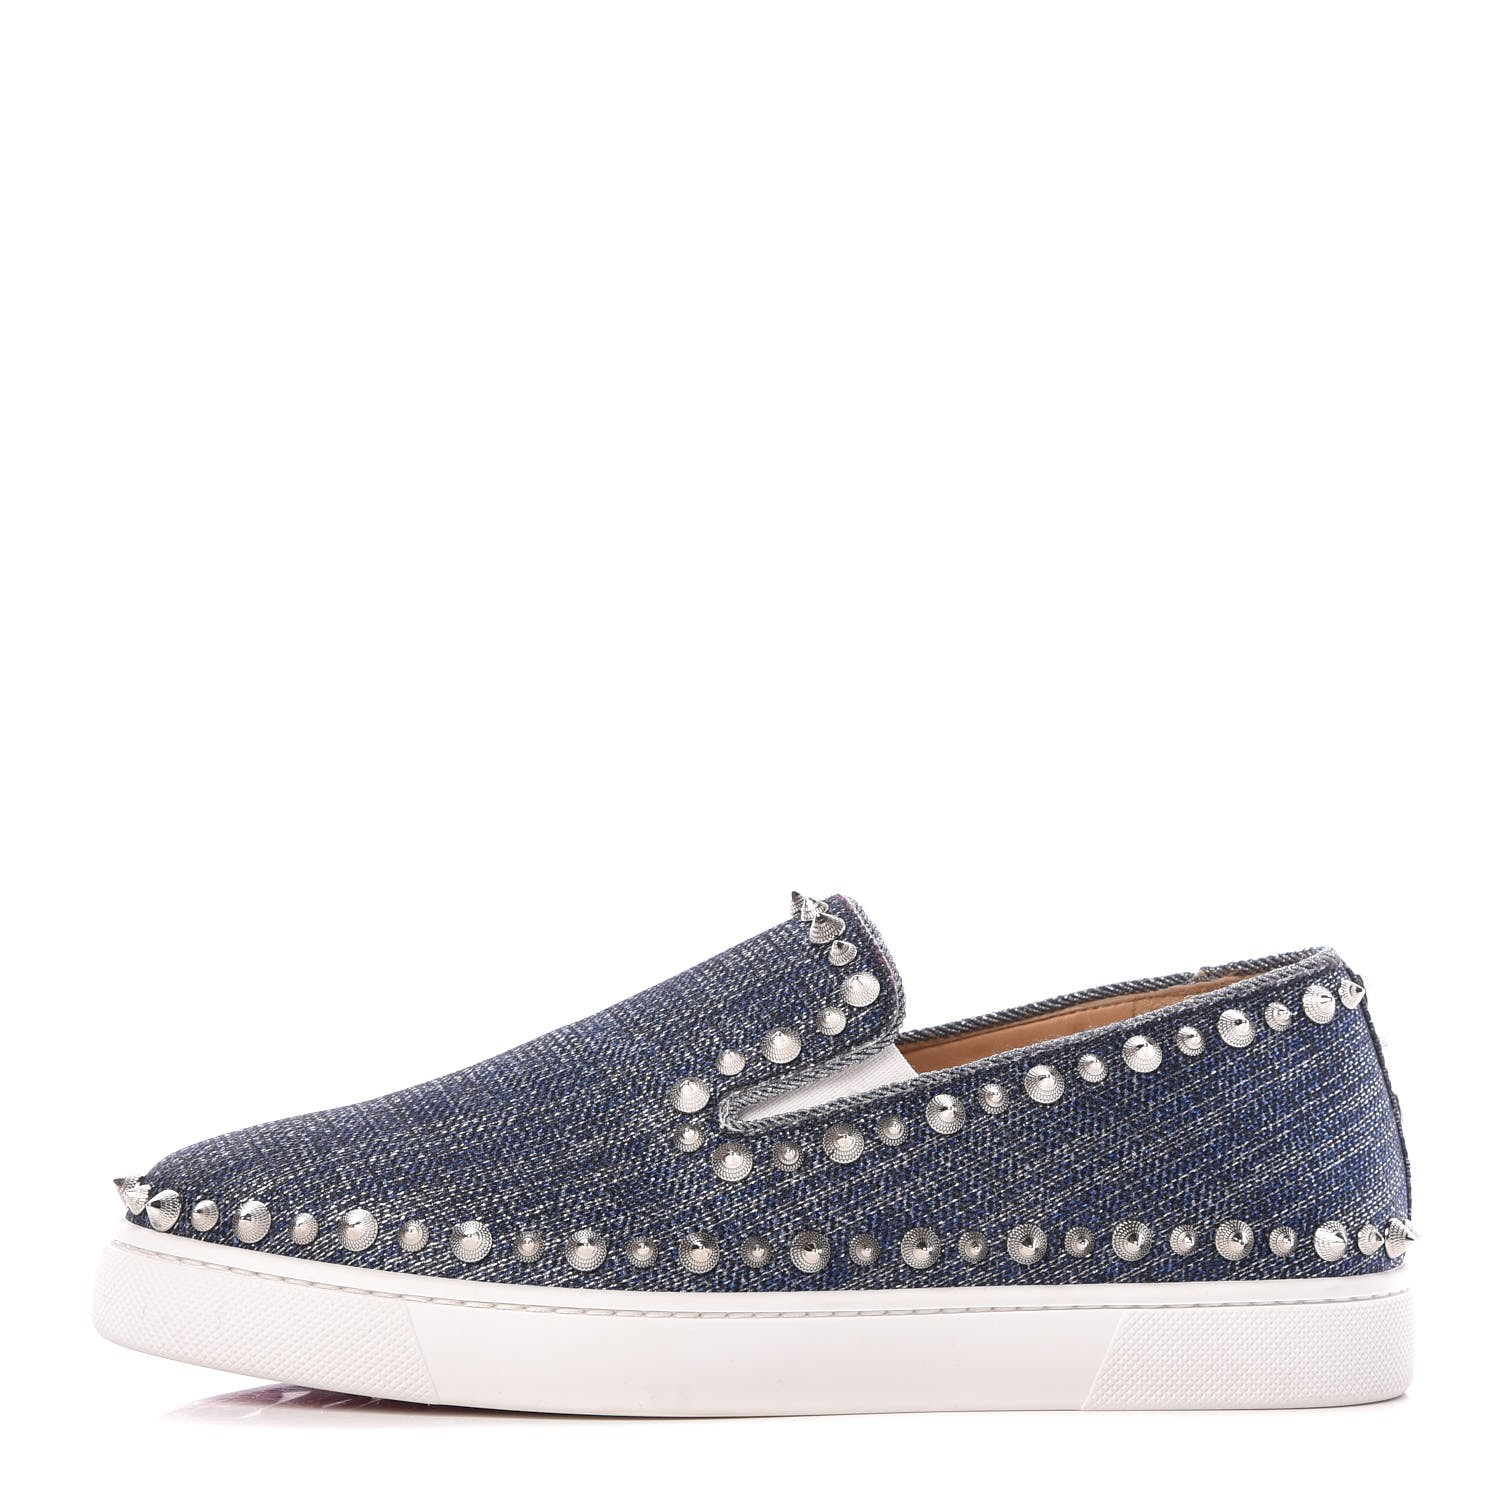 Soaked Bemærk cylinder CHRISTIAN LOUBOUTIN Womens Denim Lame Lux Spikes Pik Boat Flat 37 Silver  342512 | FASHIONPHILE